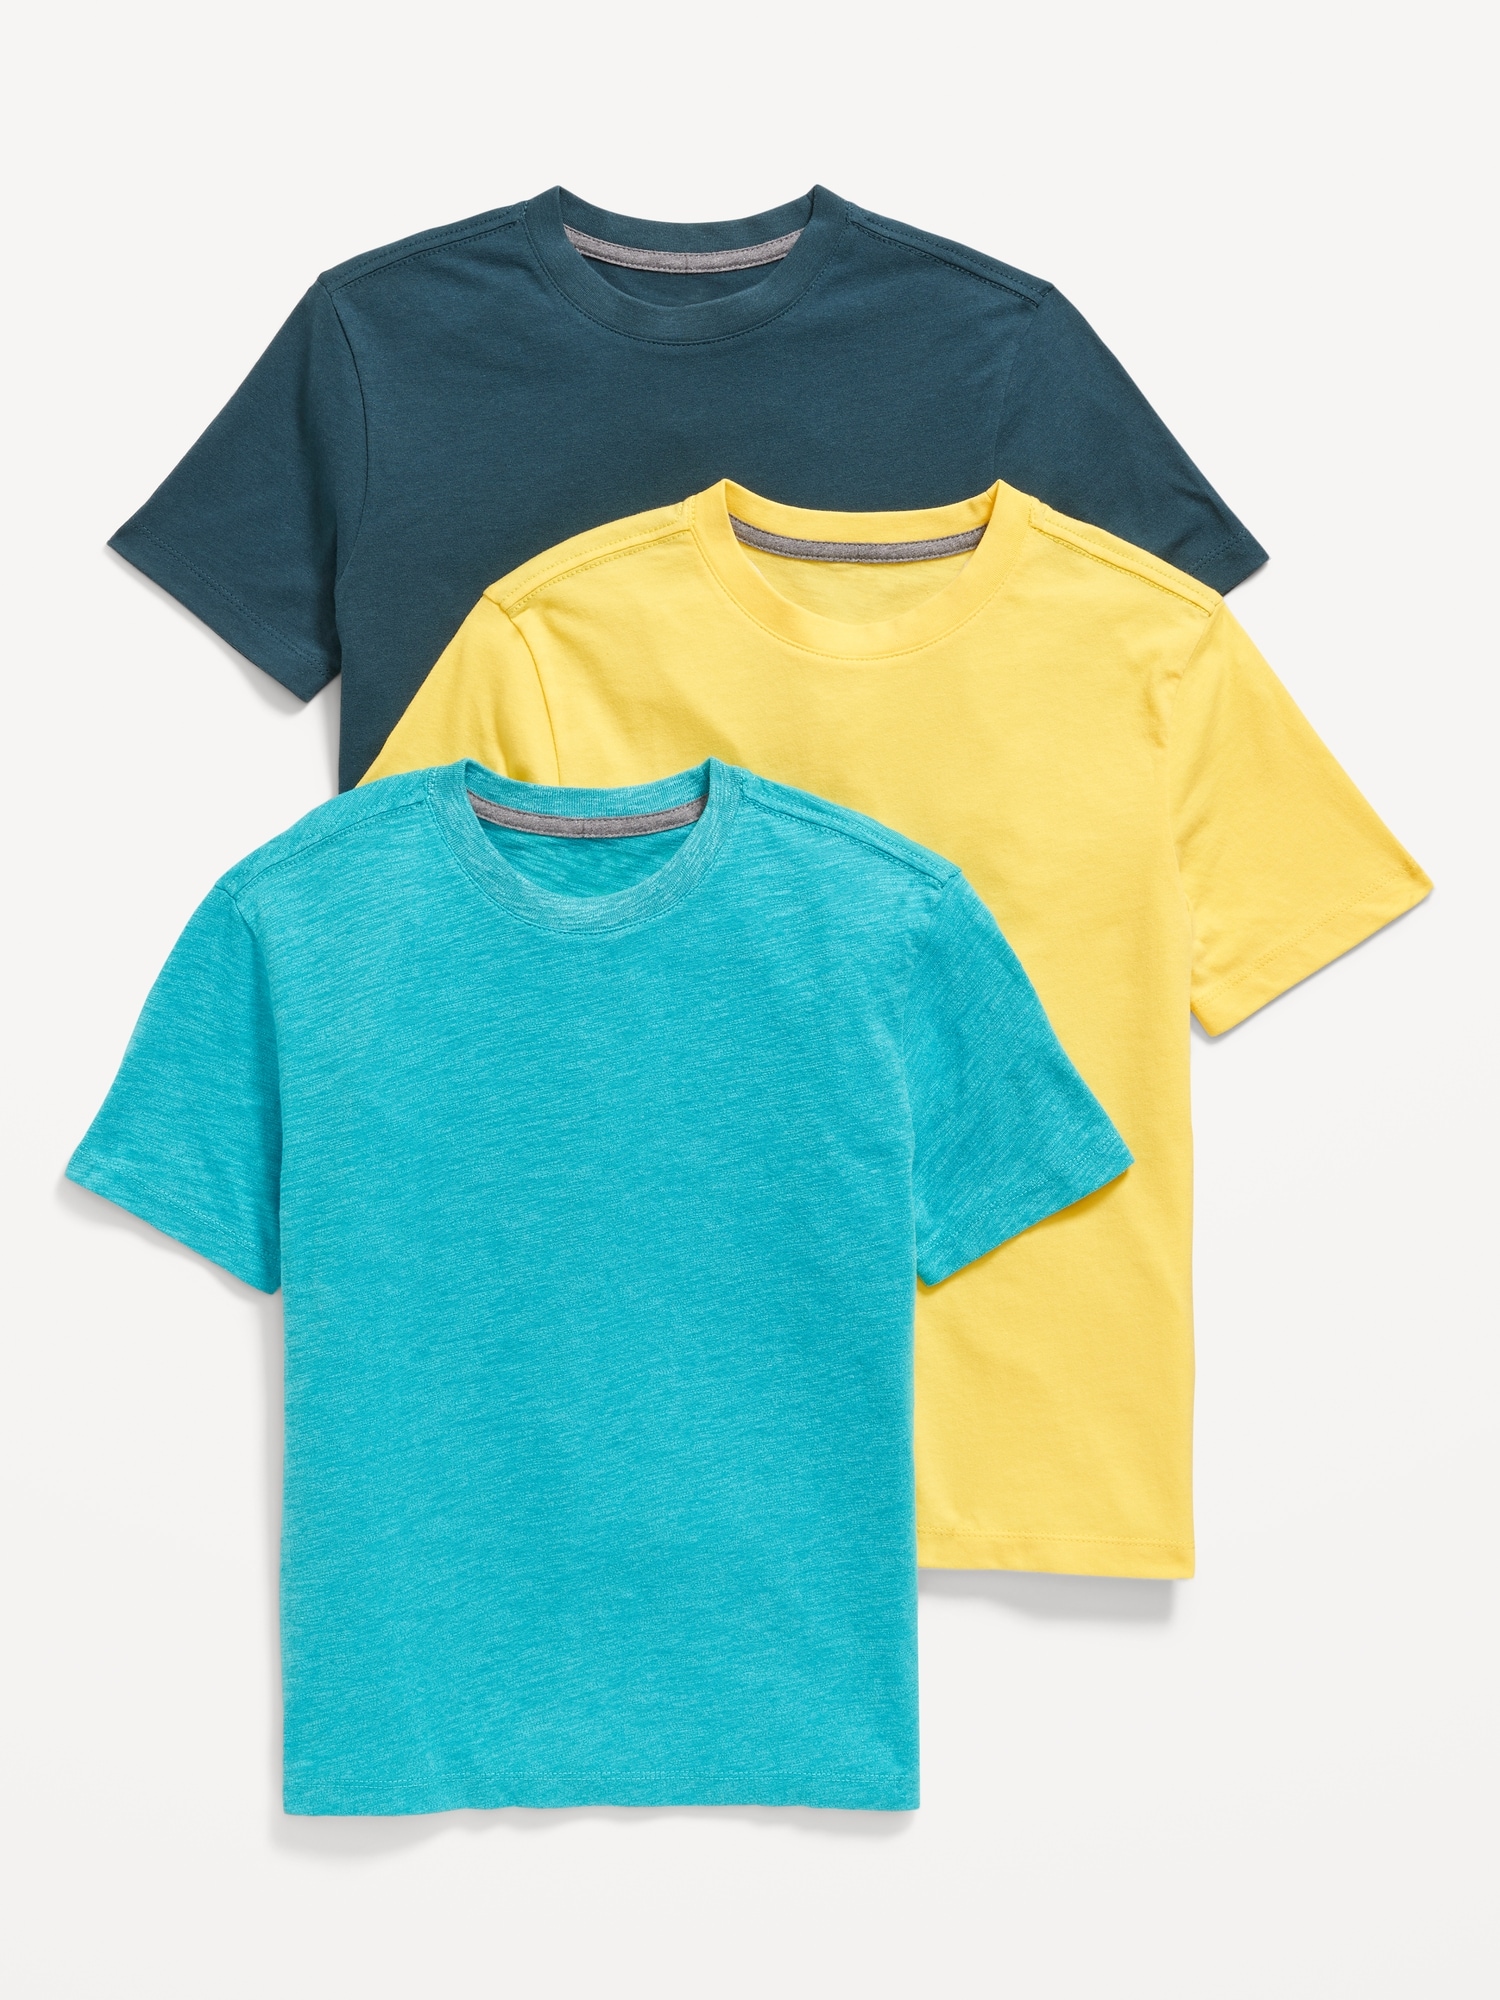 Softest Crew-Neck T-Shirt 3-Pack for Boys | Old Navy